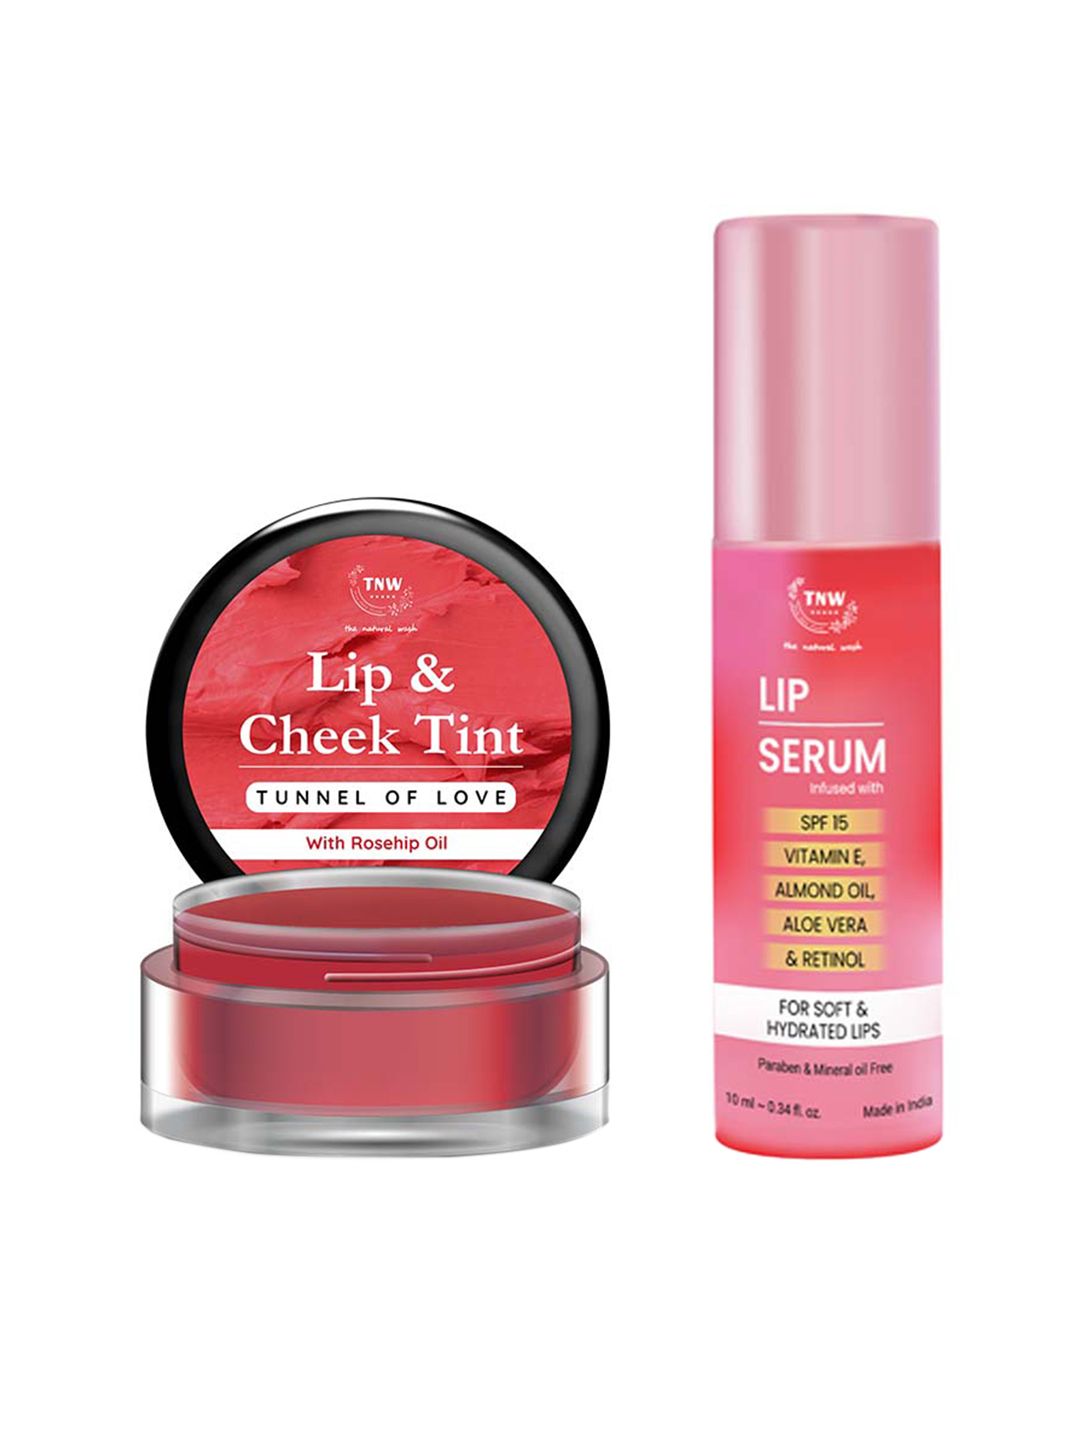 TNW the natural wash Set of Lip & Cheek Tint-Tunnel Of Love & Lip Serum Price in India